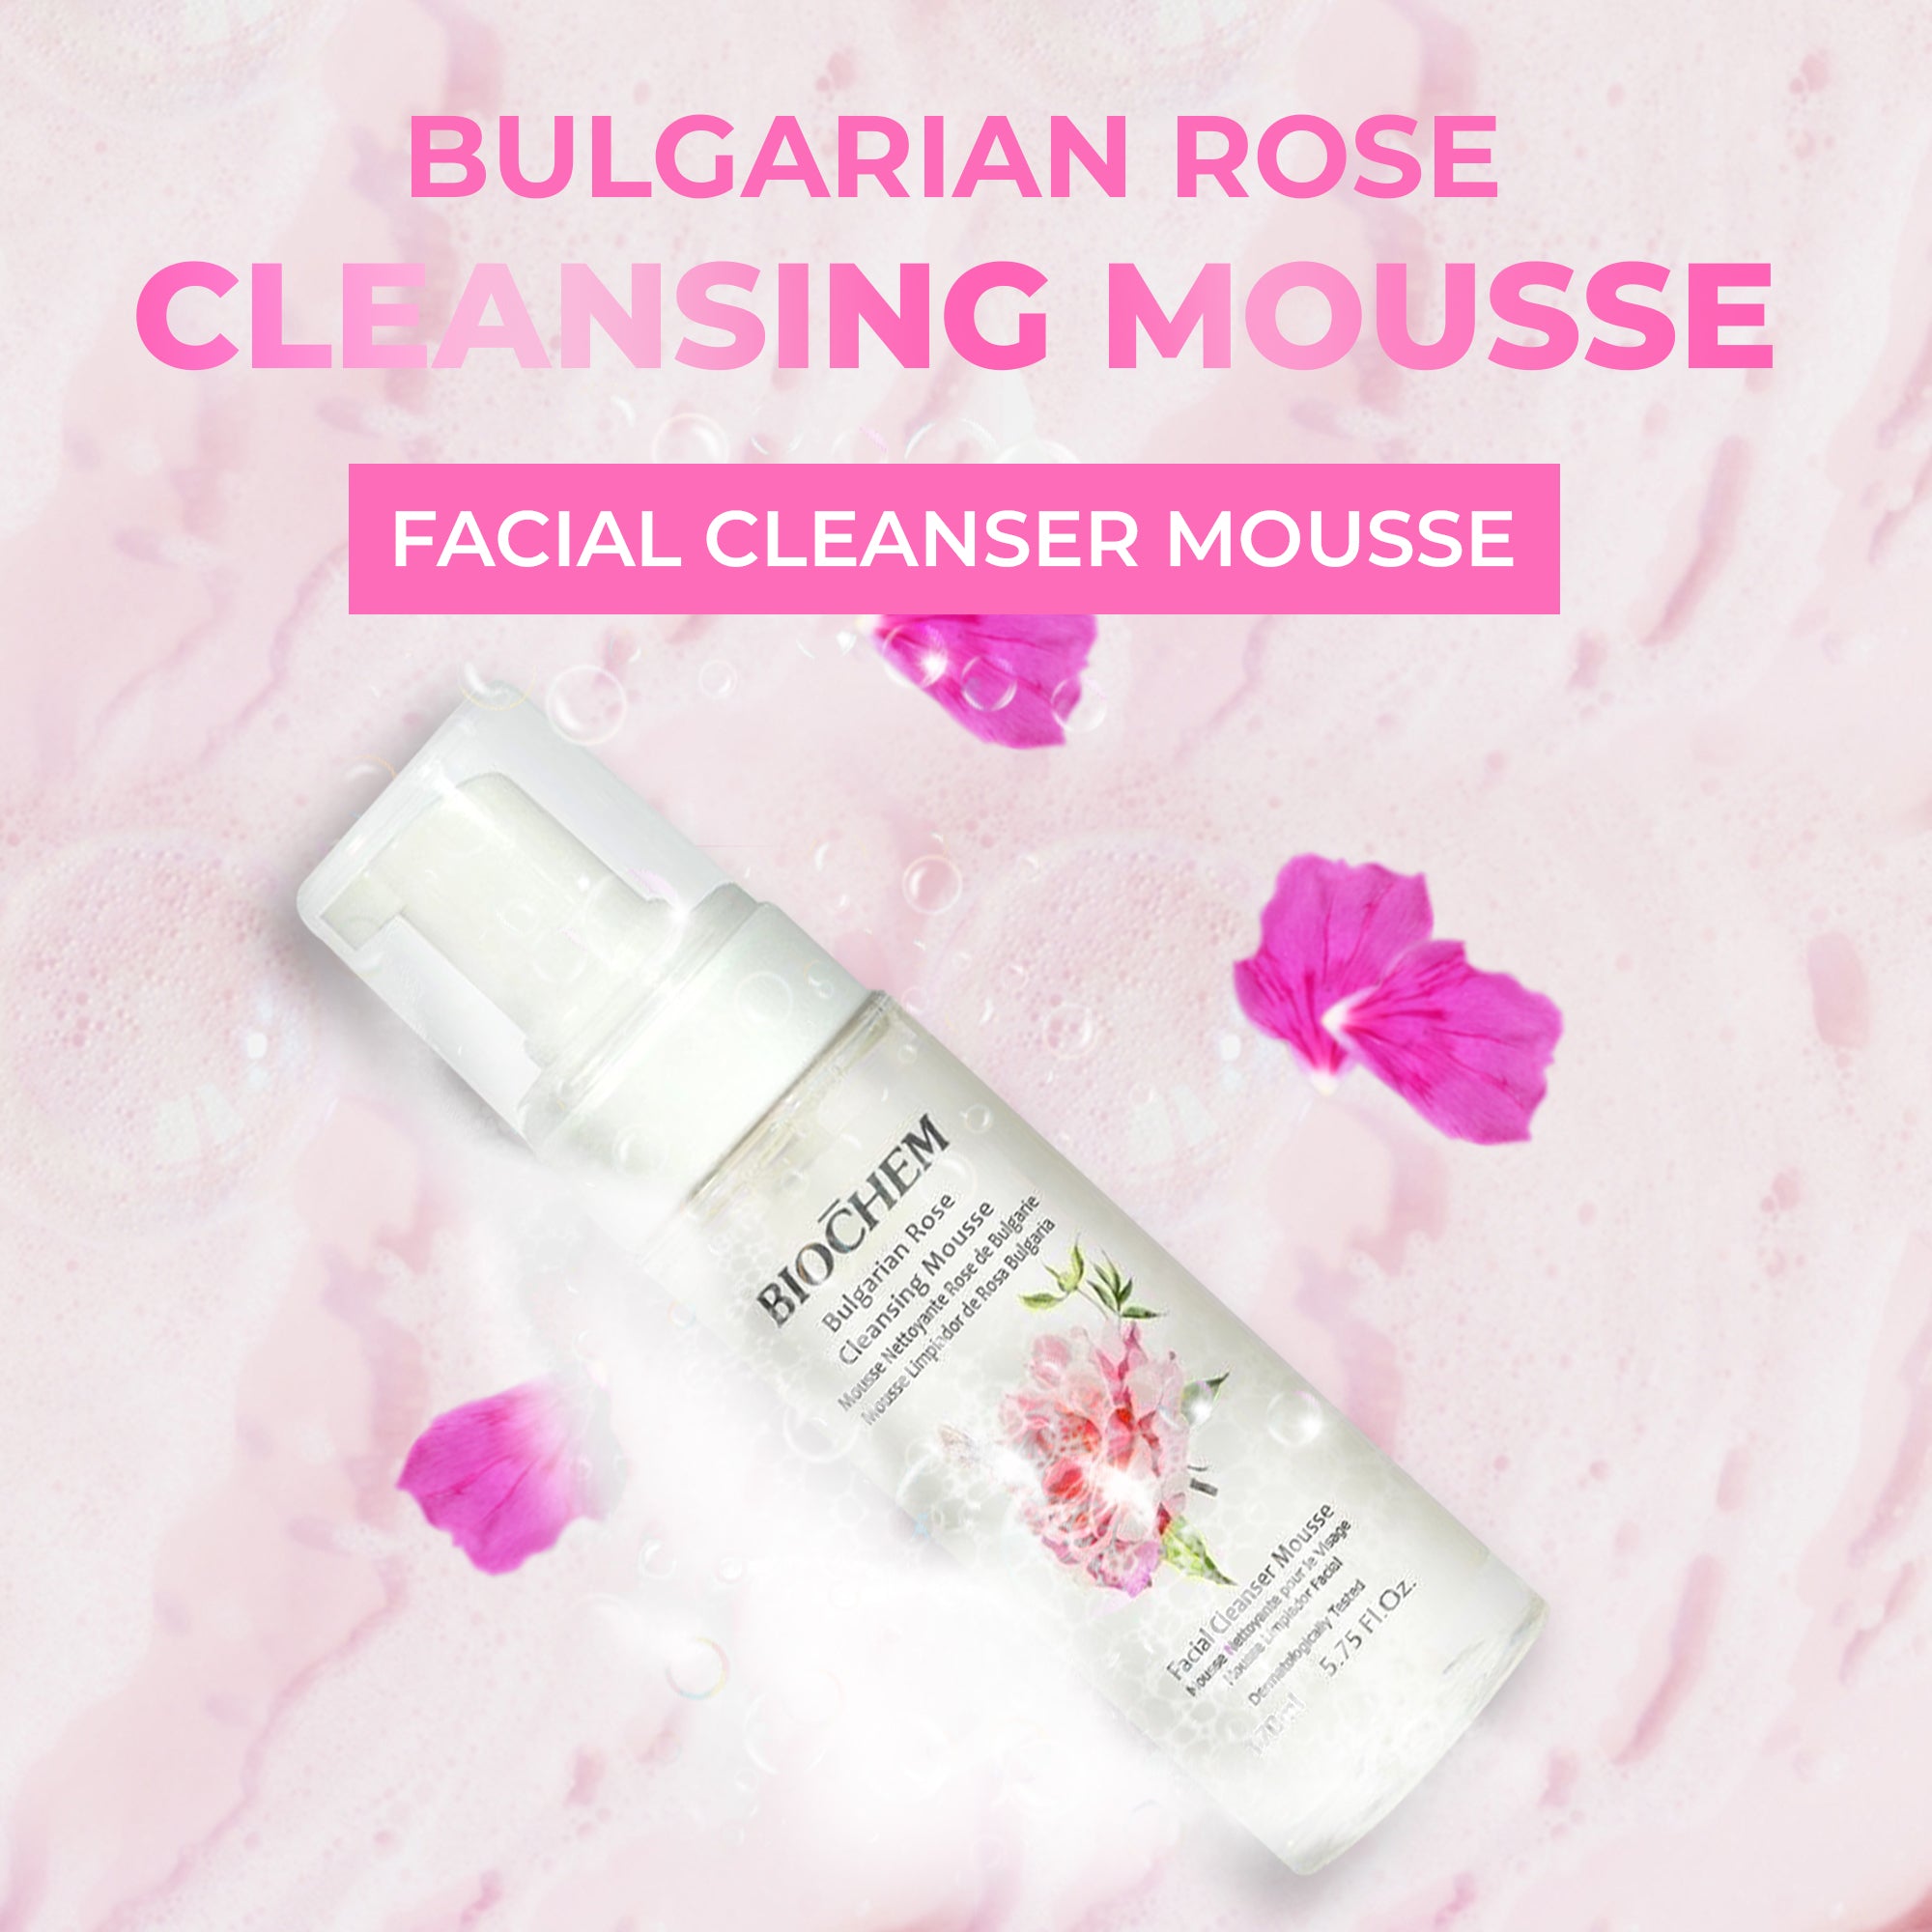 How to Use Bulgarian Rose Cleansing Mousse Effectively